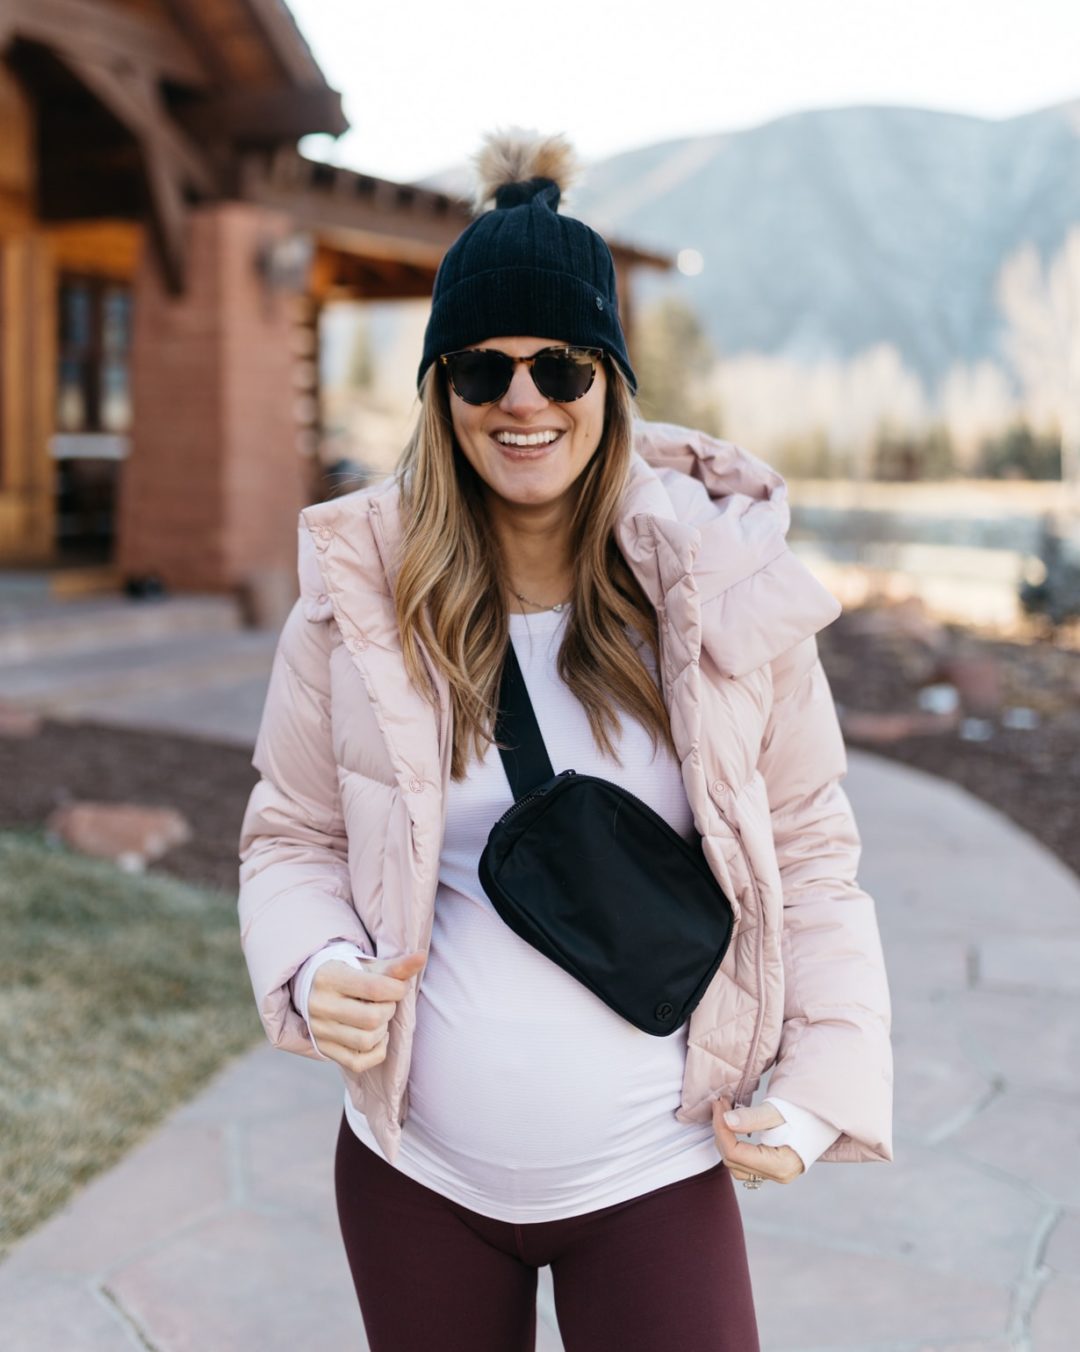 My New Obsession with Belt Bags + A Few Other Gift Ideas from lululemon